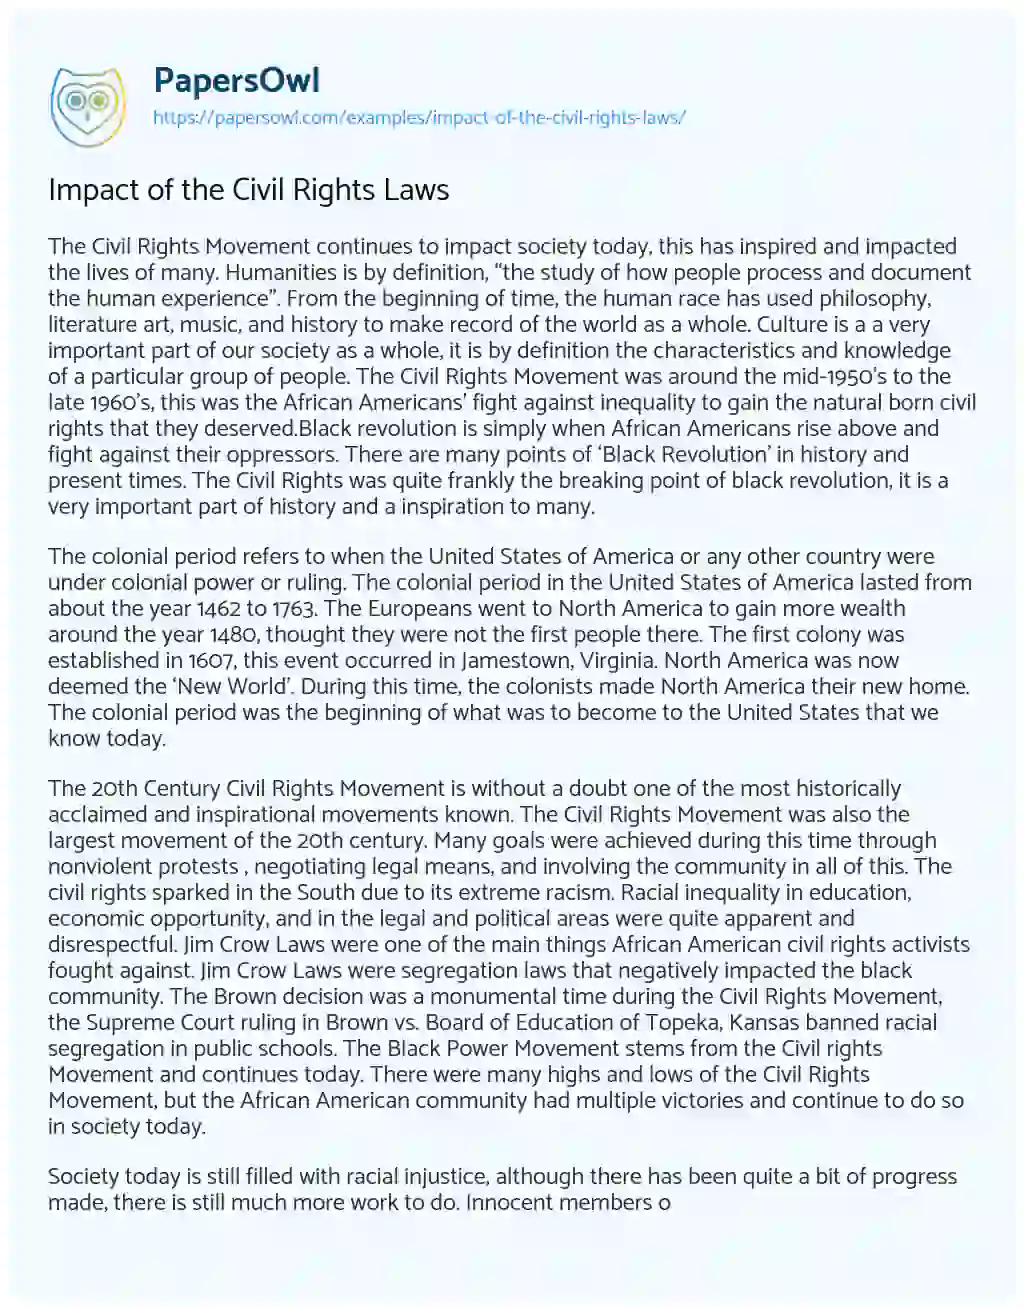 Impact of the Civil Rights Laws essay